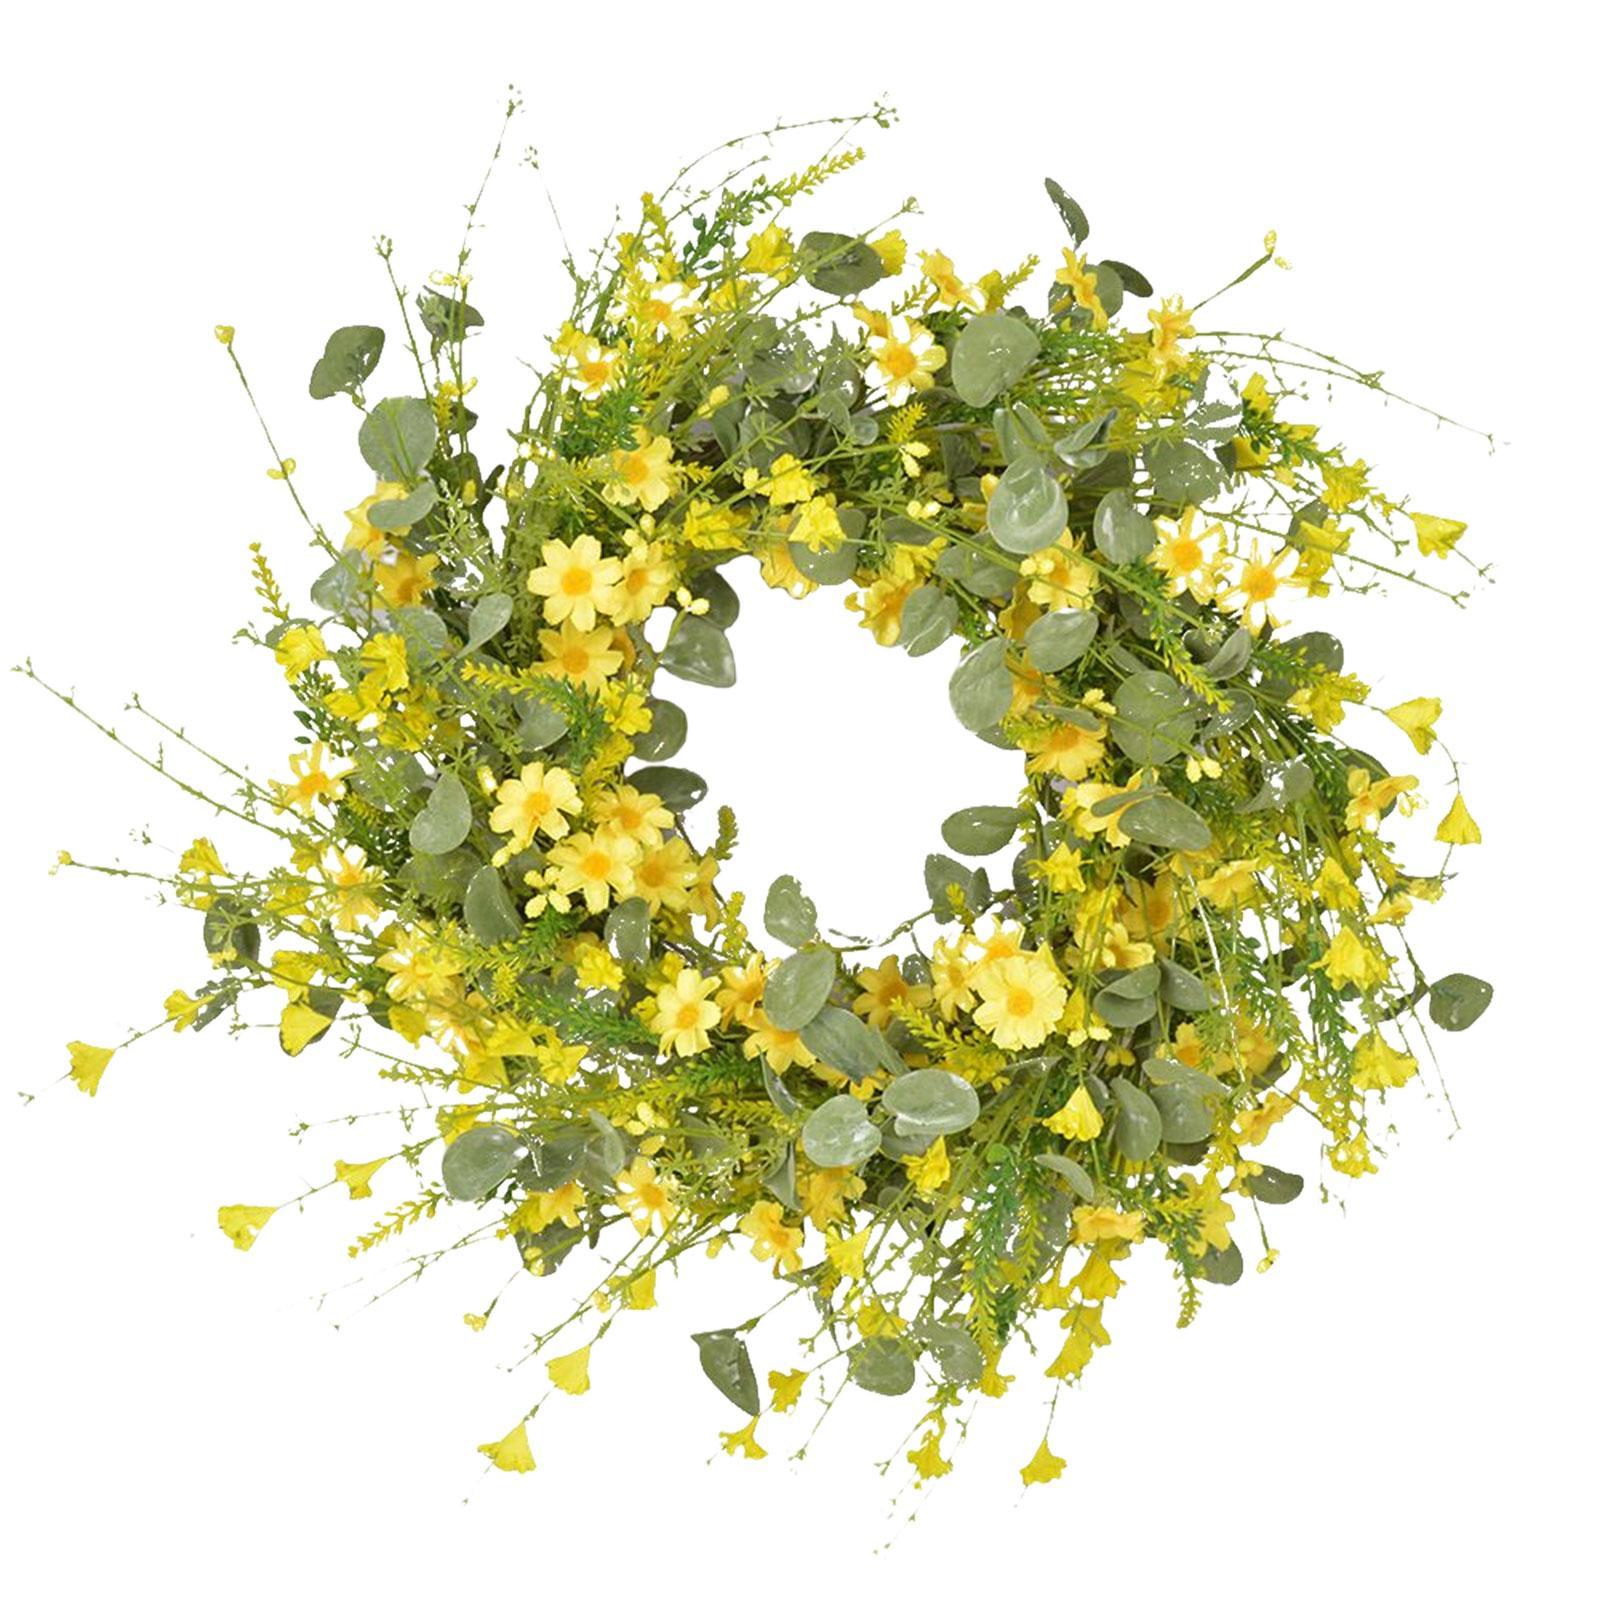 Artificial Daisy Eucalyptus Wreath, Front Door Hanging Floral Simulated Flower Wreath for Festival Holidays Window Home Decor Patio